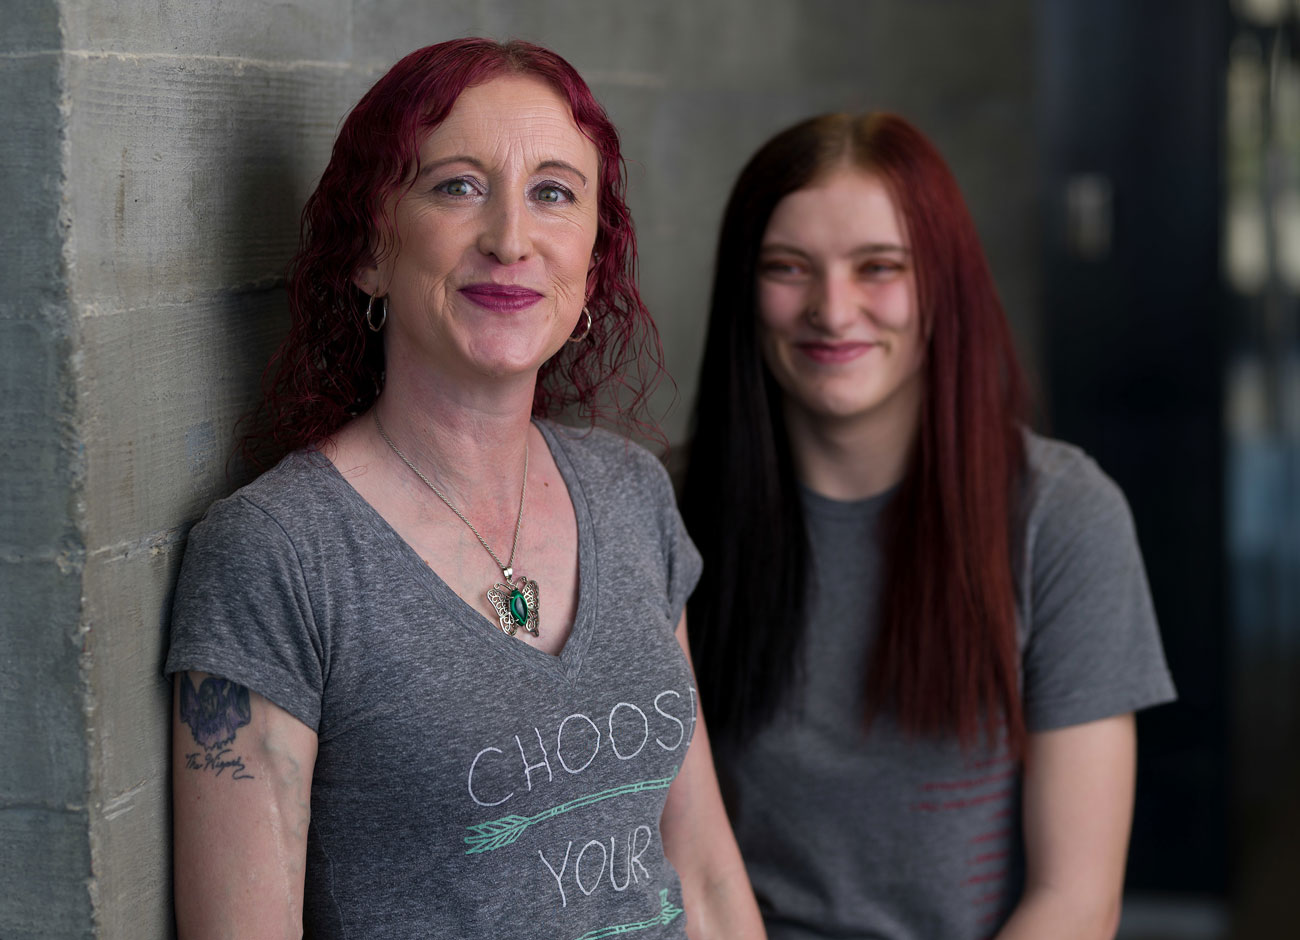 a woman with red hair and blue eyes smiles with her mouth closed. She has a butterfly necklace and shirt that reads "Choose Your" with arrows pointing in different directions